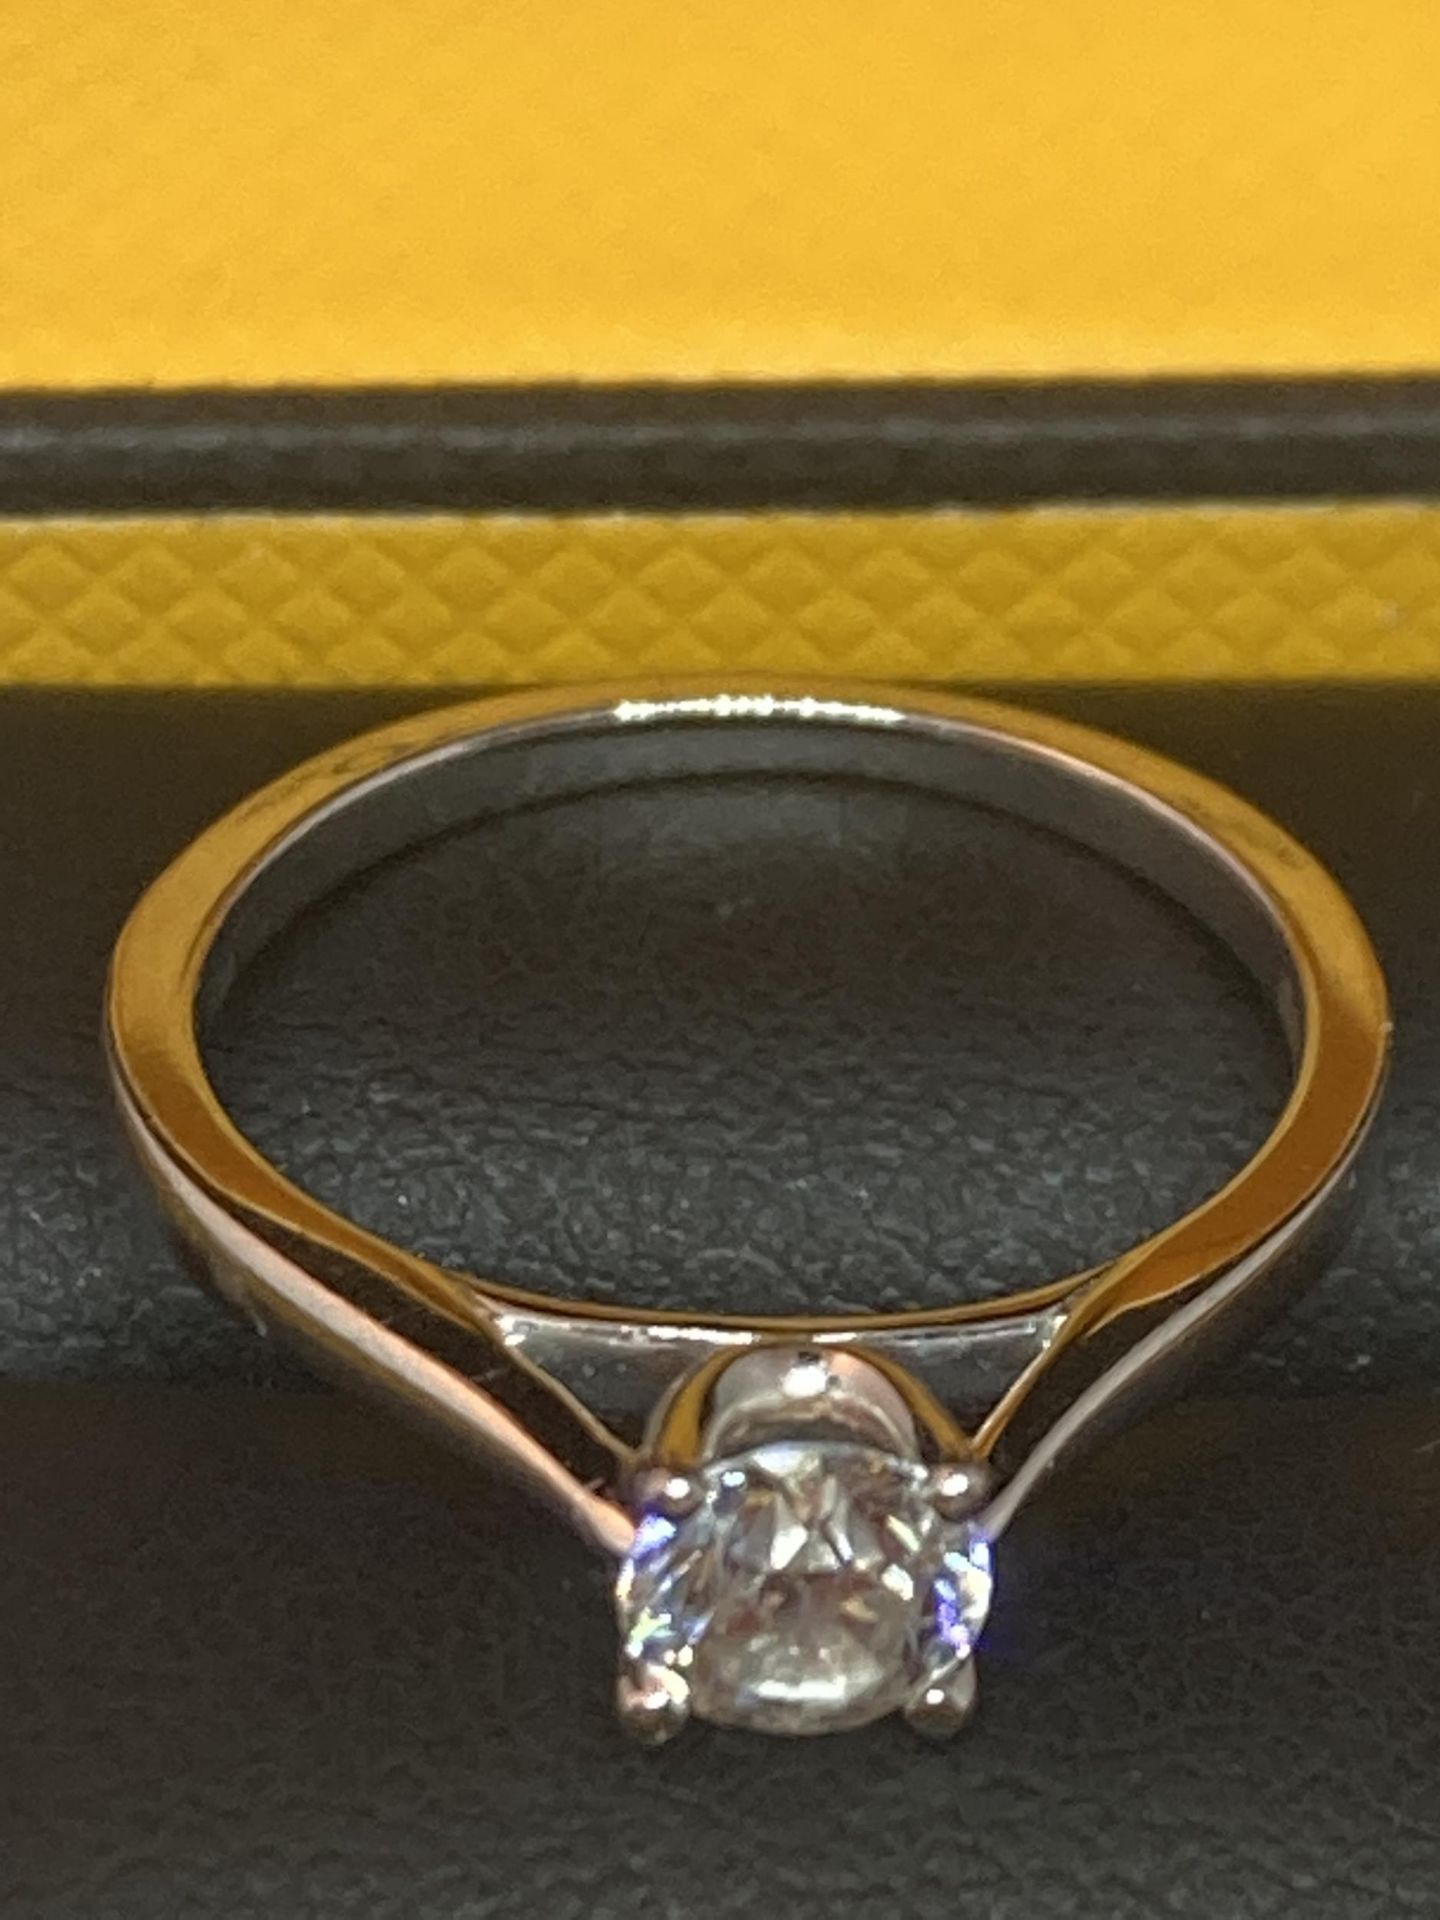 AN 18 CARAT WHITE GOLD RING WITH A 0.5 CARAT SOLITAIRE DIAMOND COMPLETE WITH GGI CERTIFICATE IN - Image 3 of 7